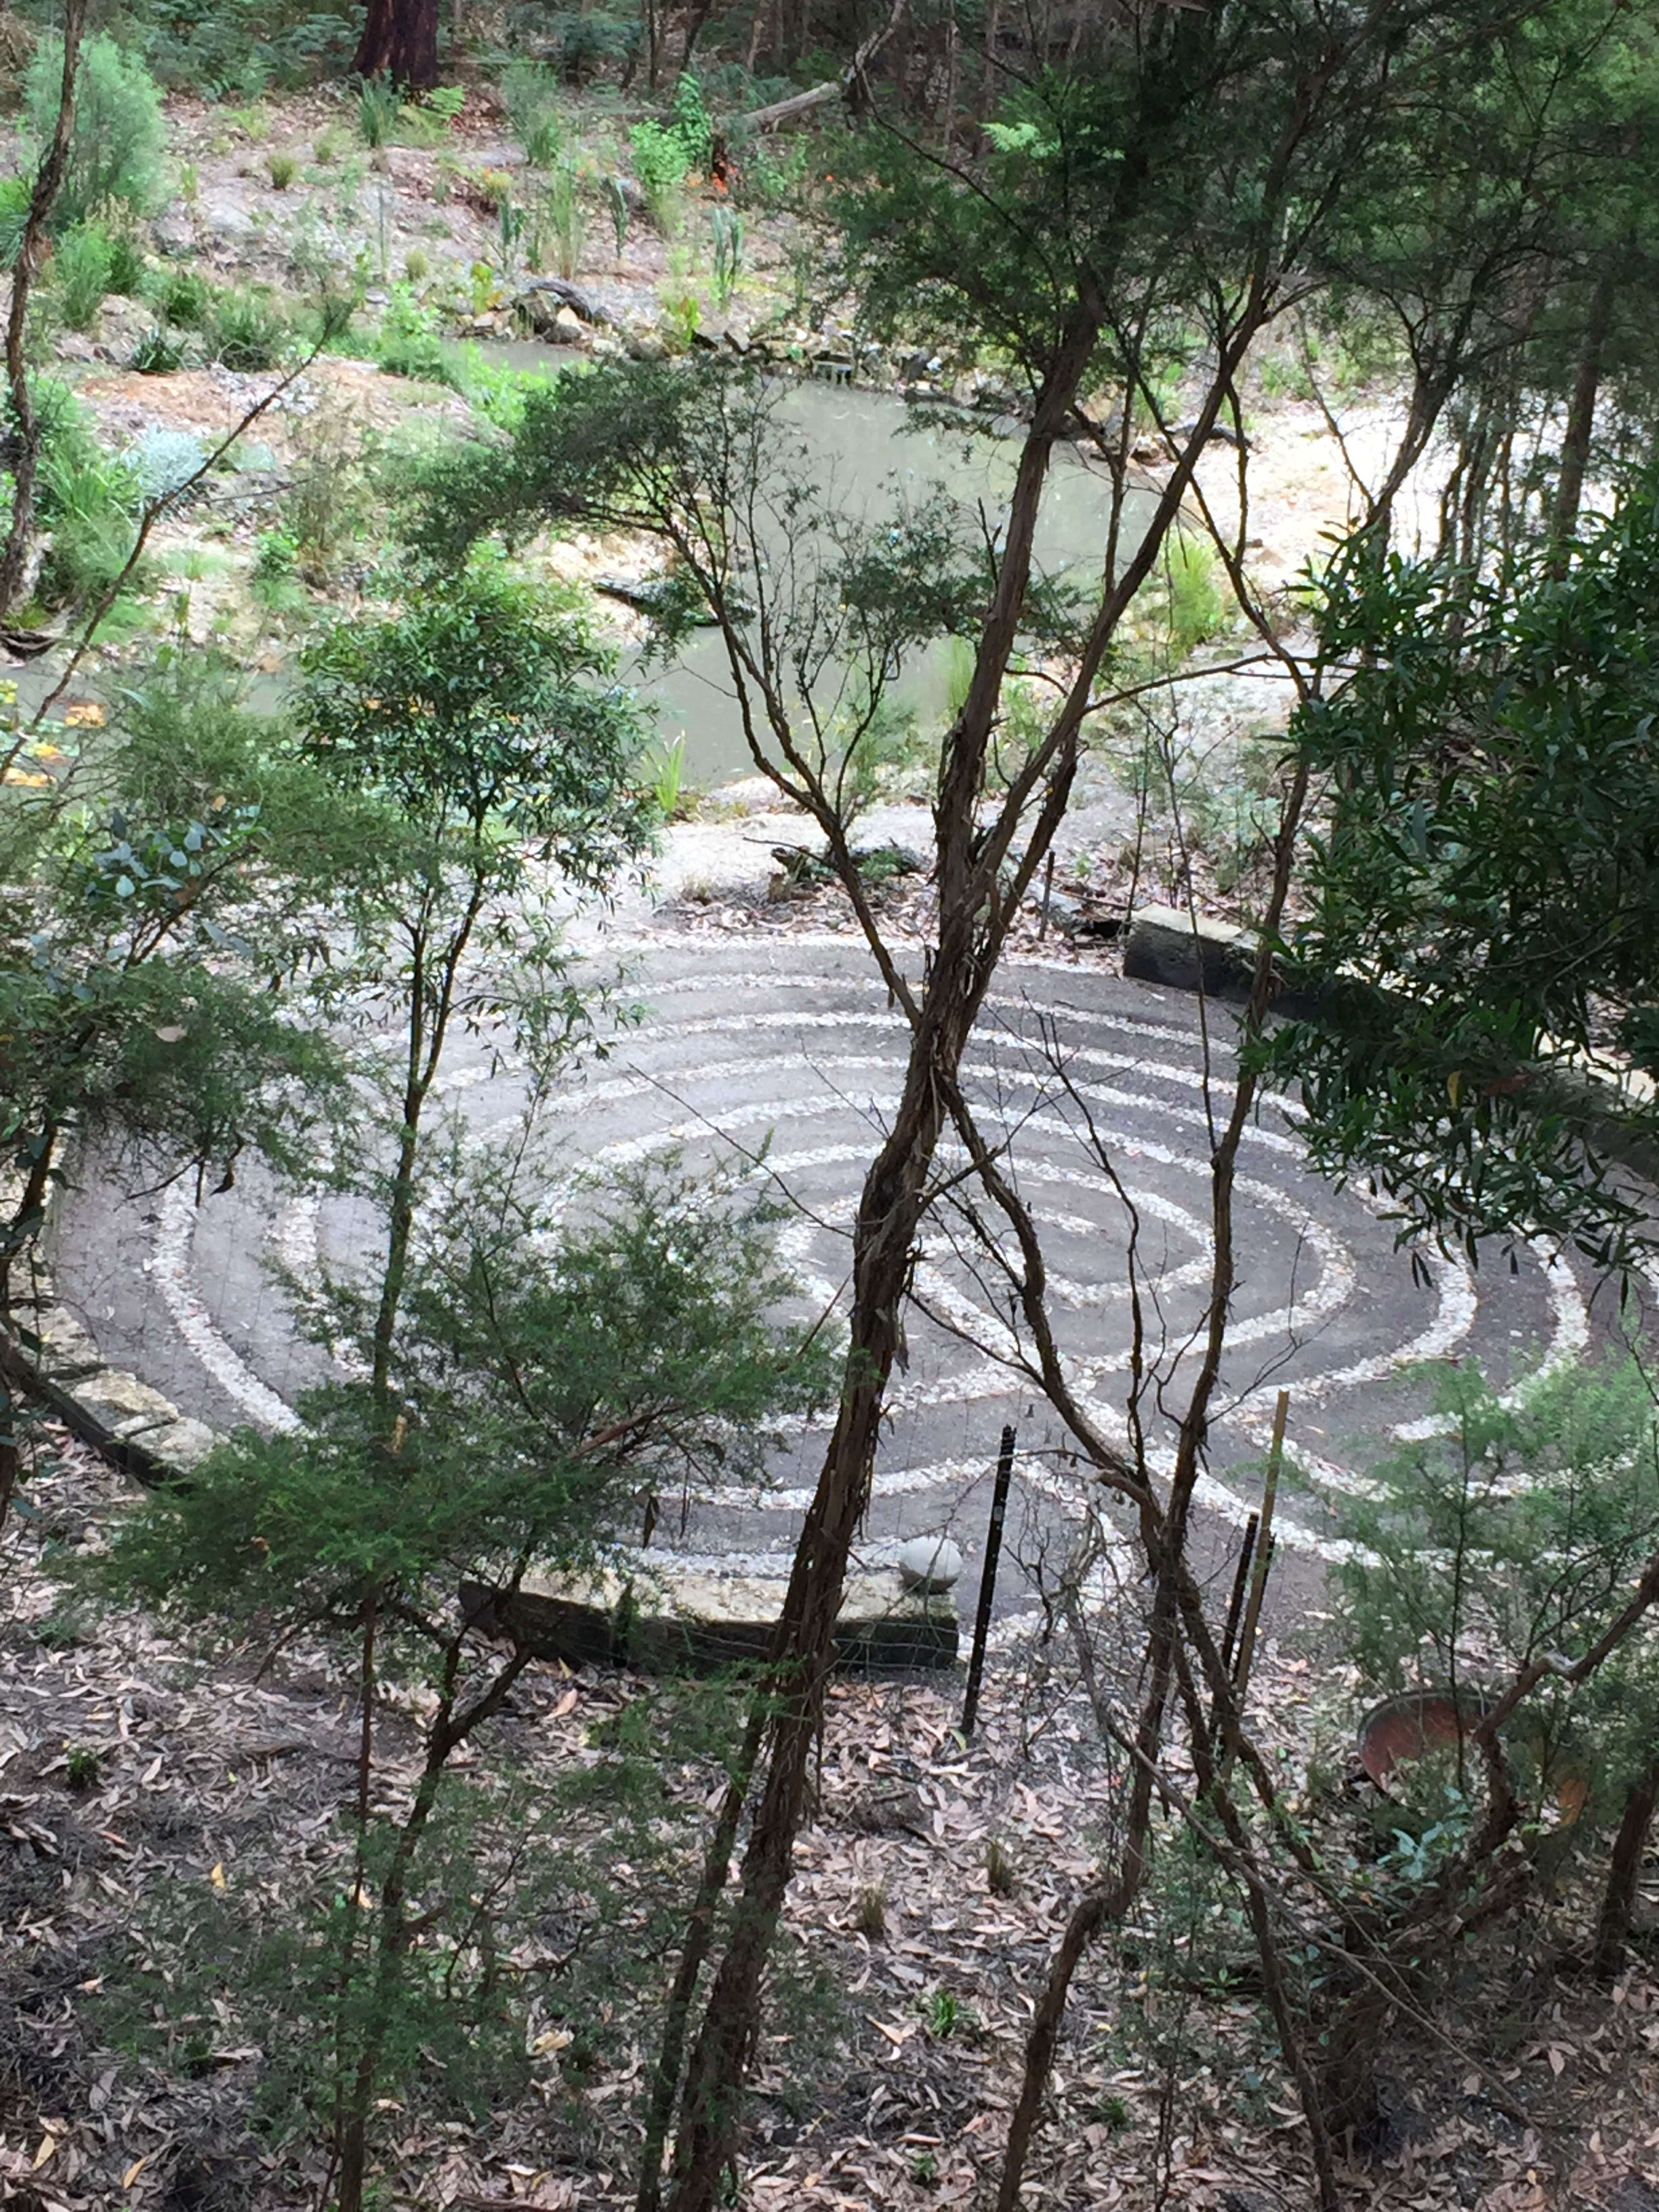 We built the Labyrinth for fun and relaxation. Enjoy walking the loops and coils as you unwind your busy mind.